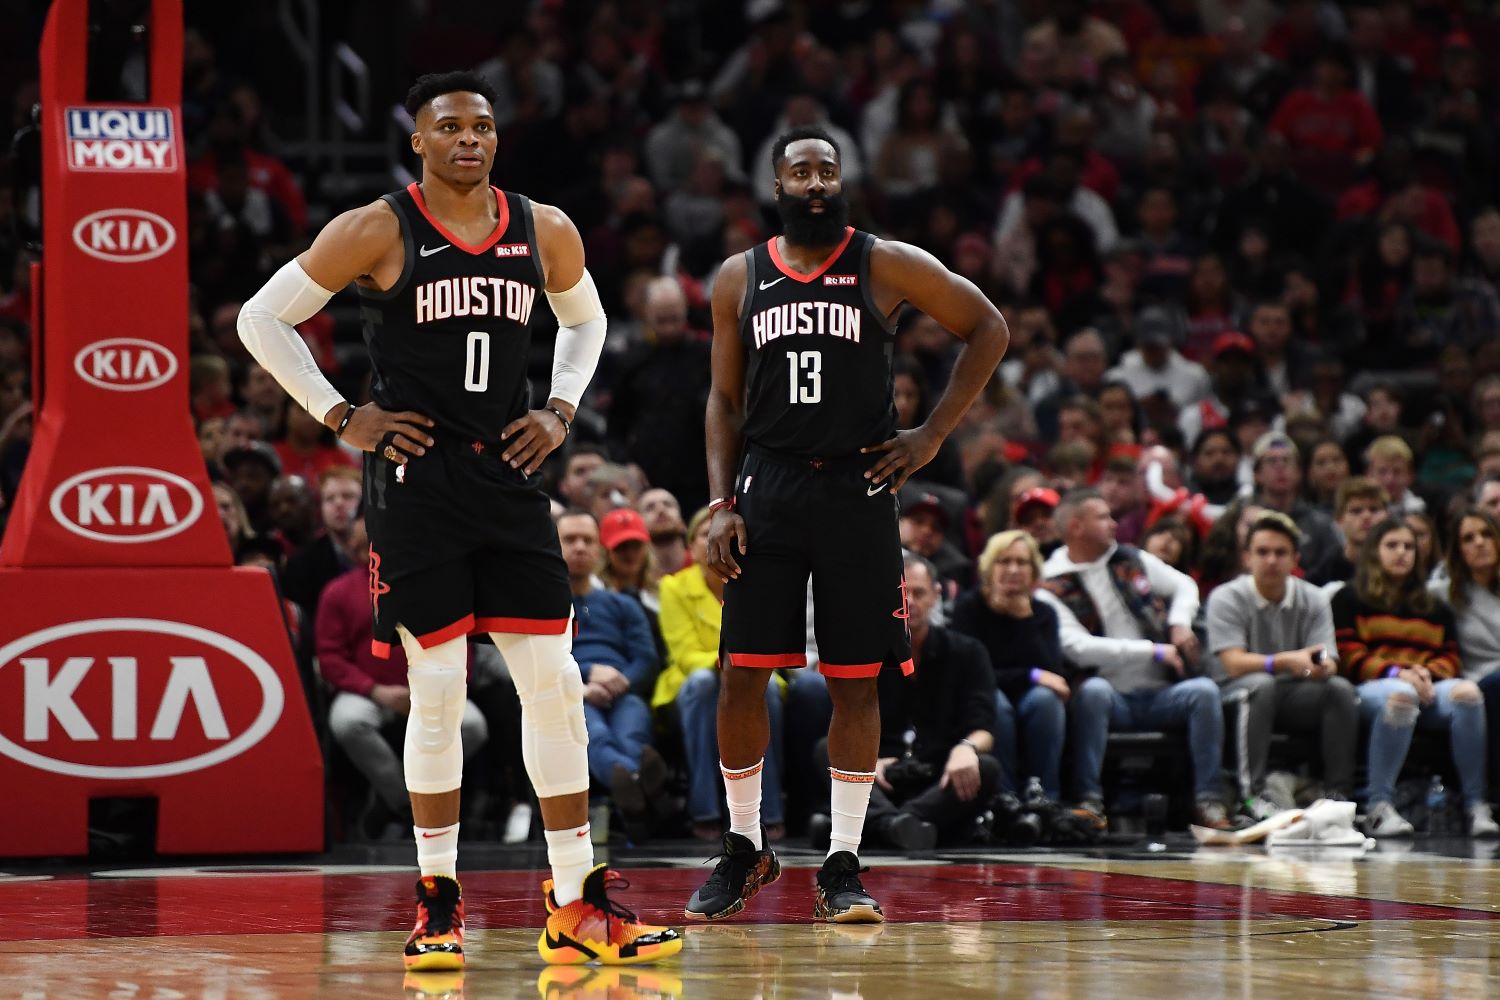 The Houston Rockets are going to lose James Harden and Russell Westbrook over a foolish mistake that could have easily been avoided.